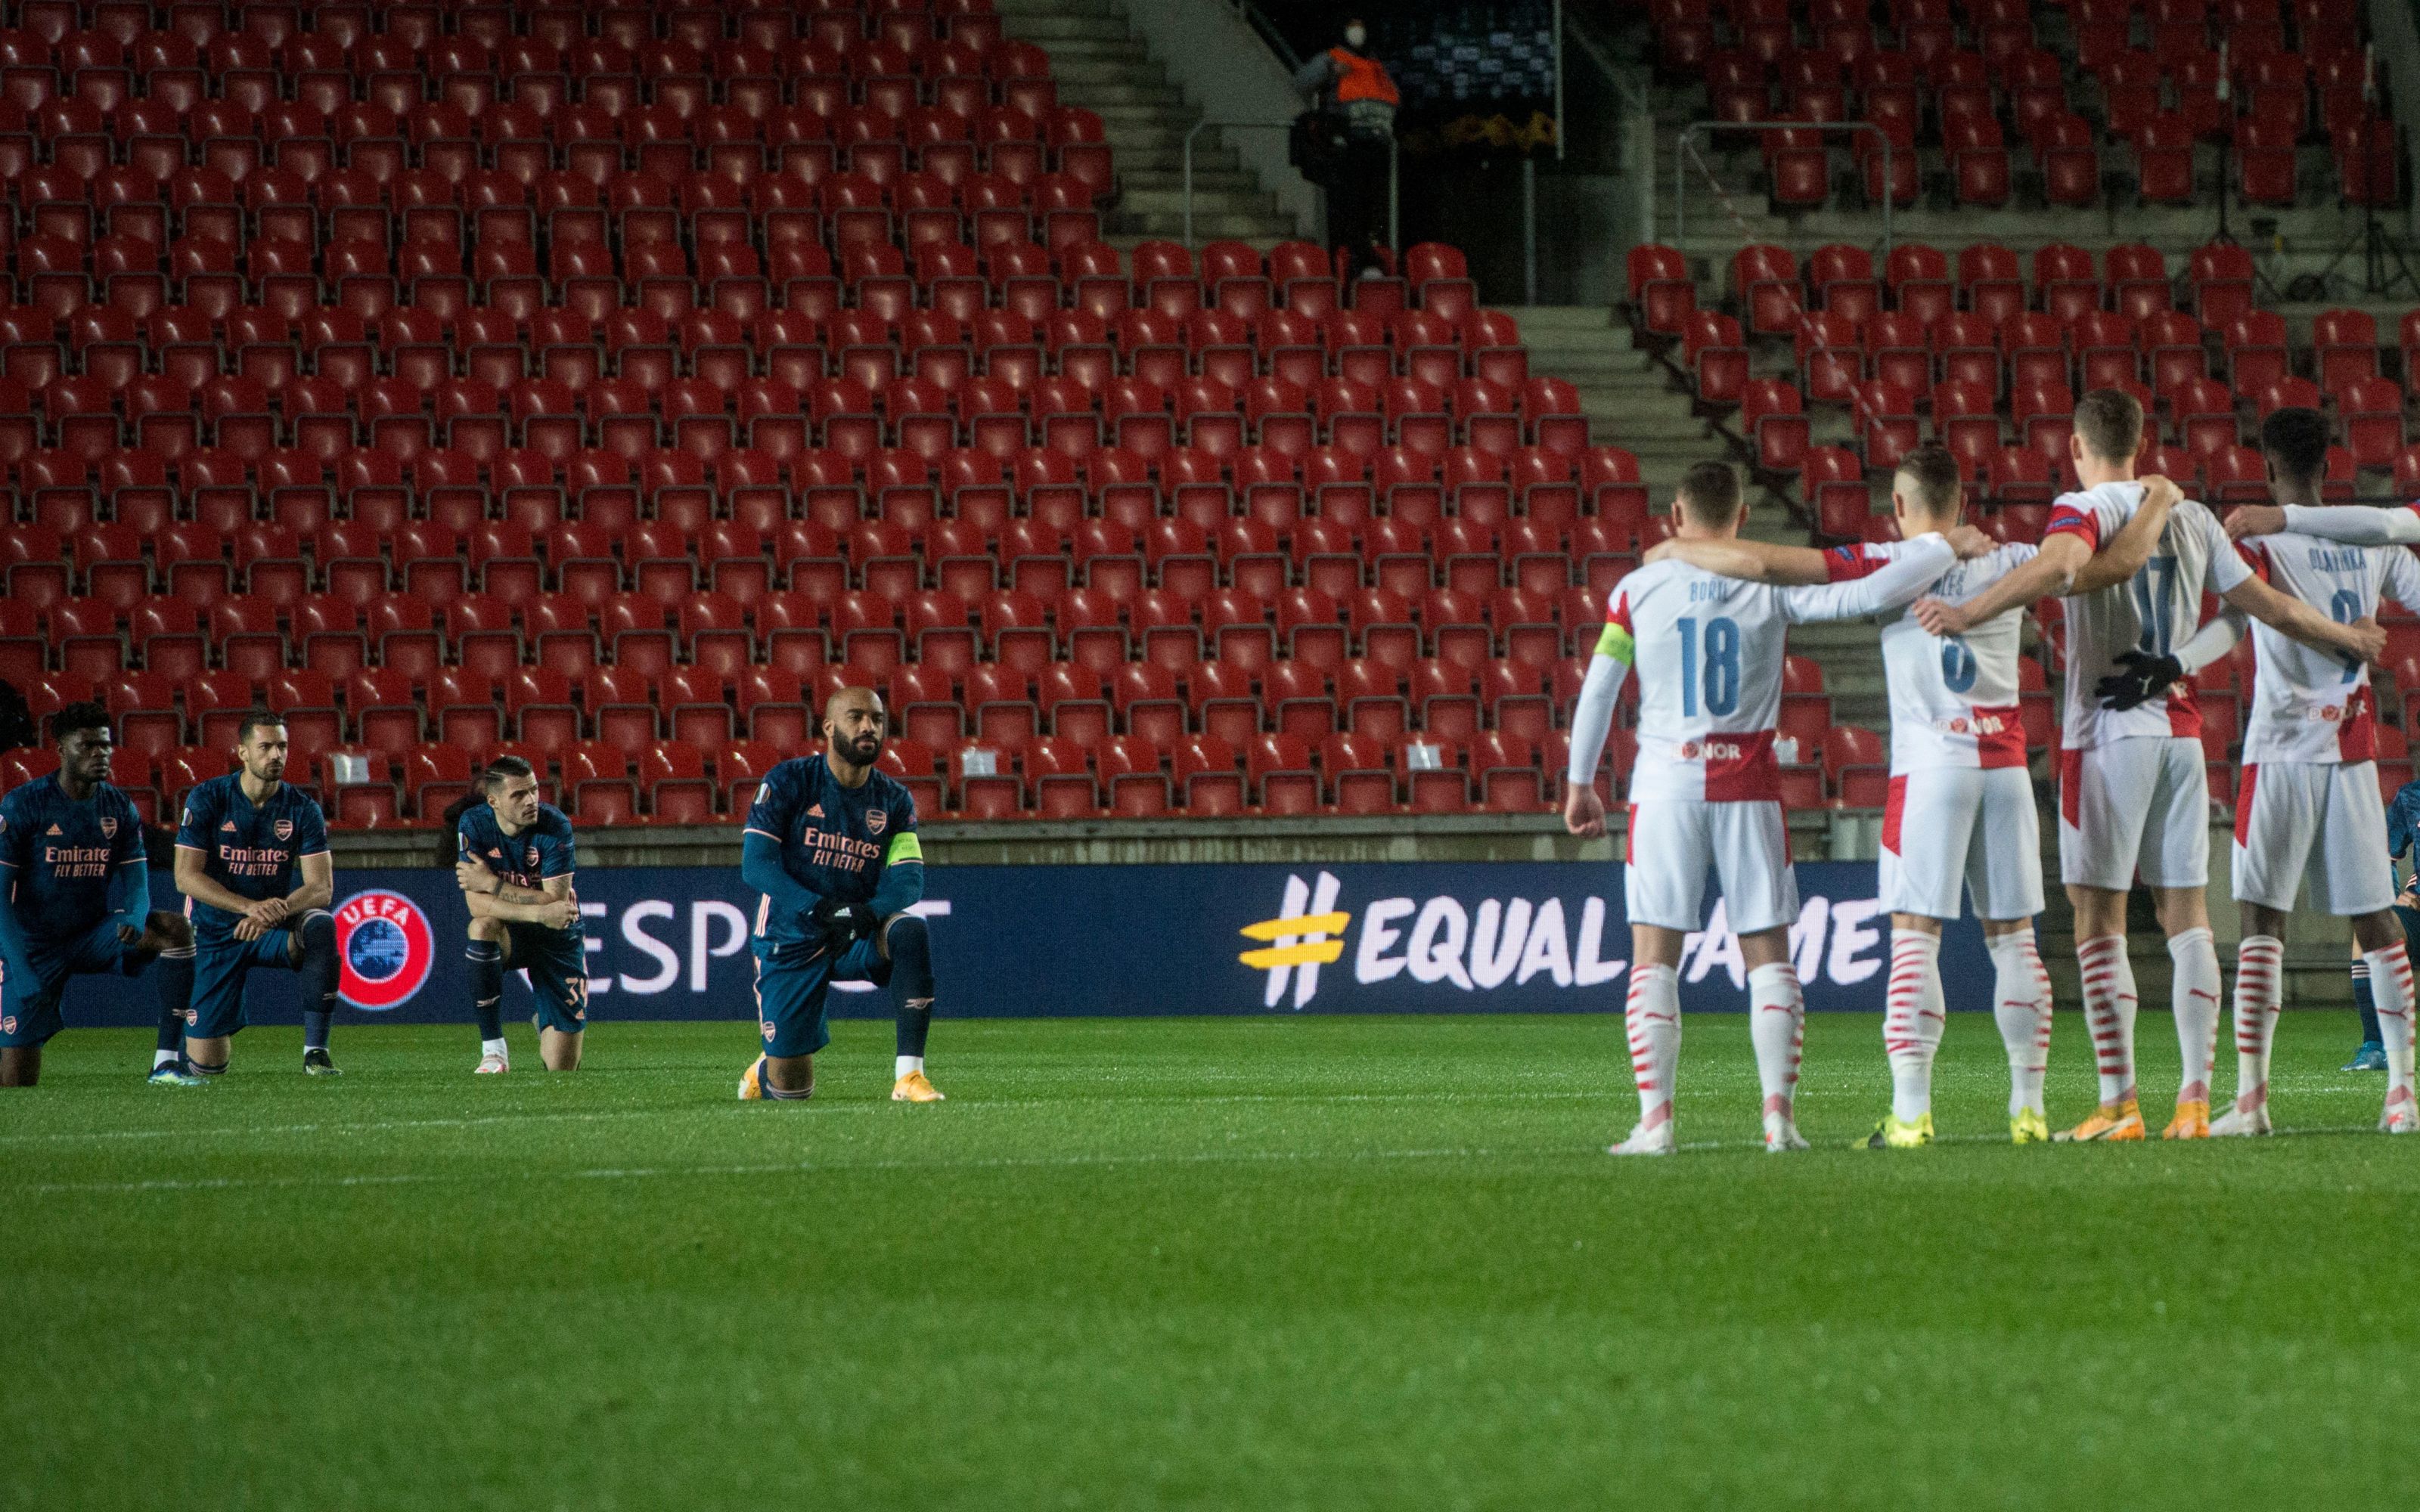 Rangers' Europa League dream ended by defeat to Slavia Prague